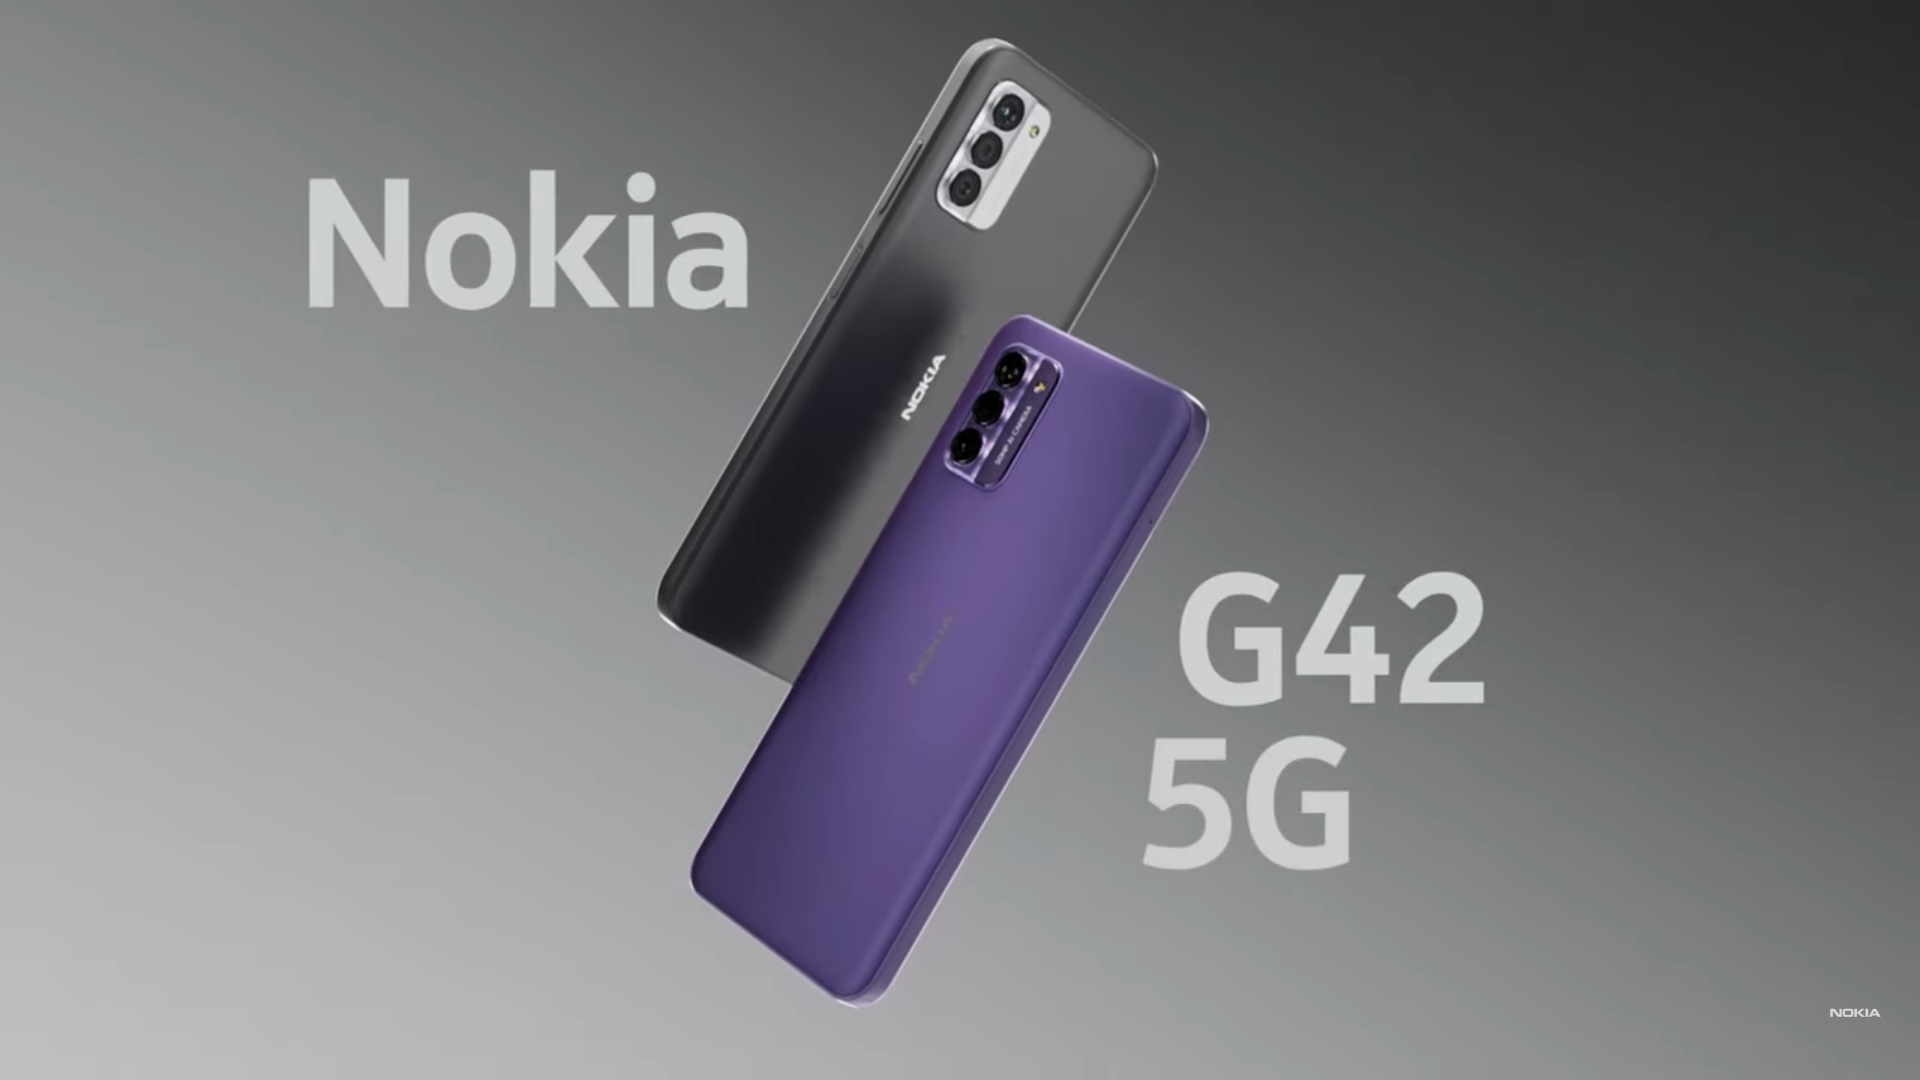 Nokia G42 touted as new Super Fast 5G Android smartphone on launch -  NotebookCheck.net News